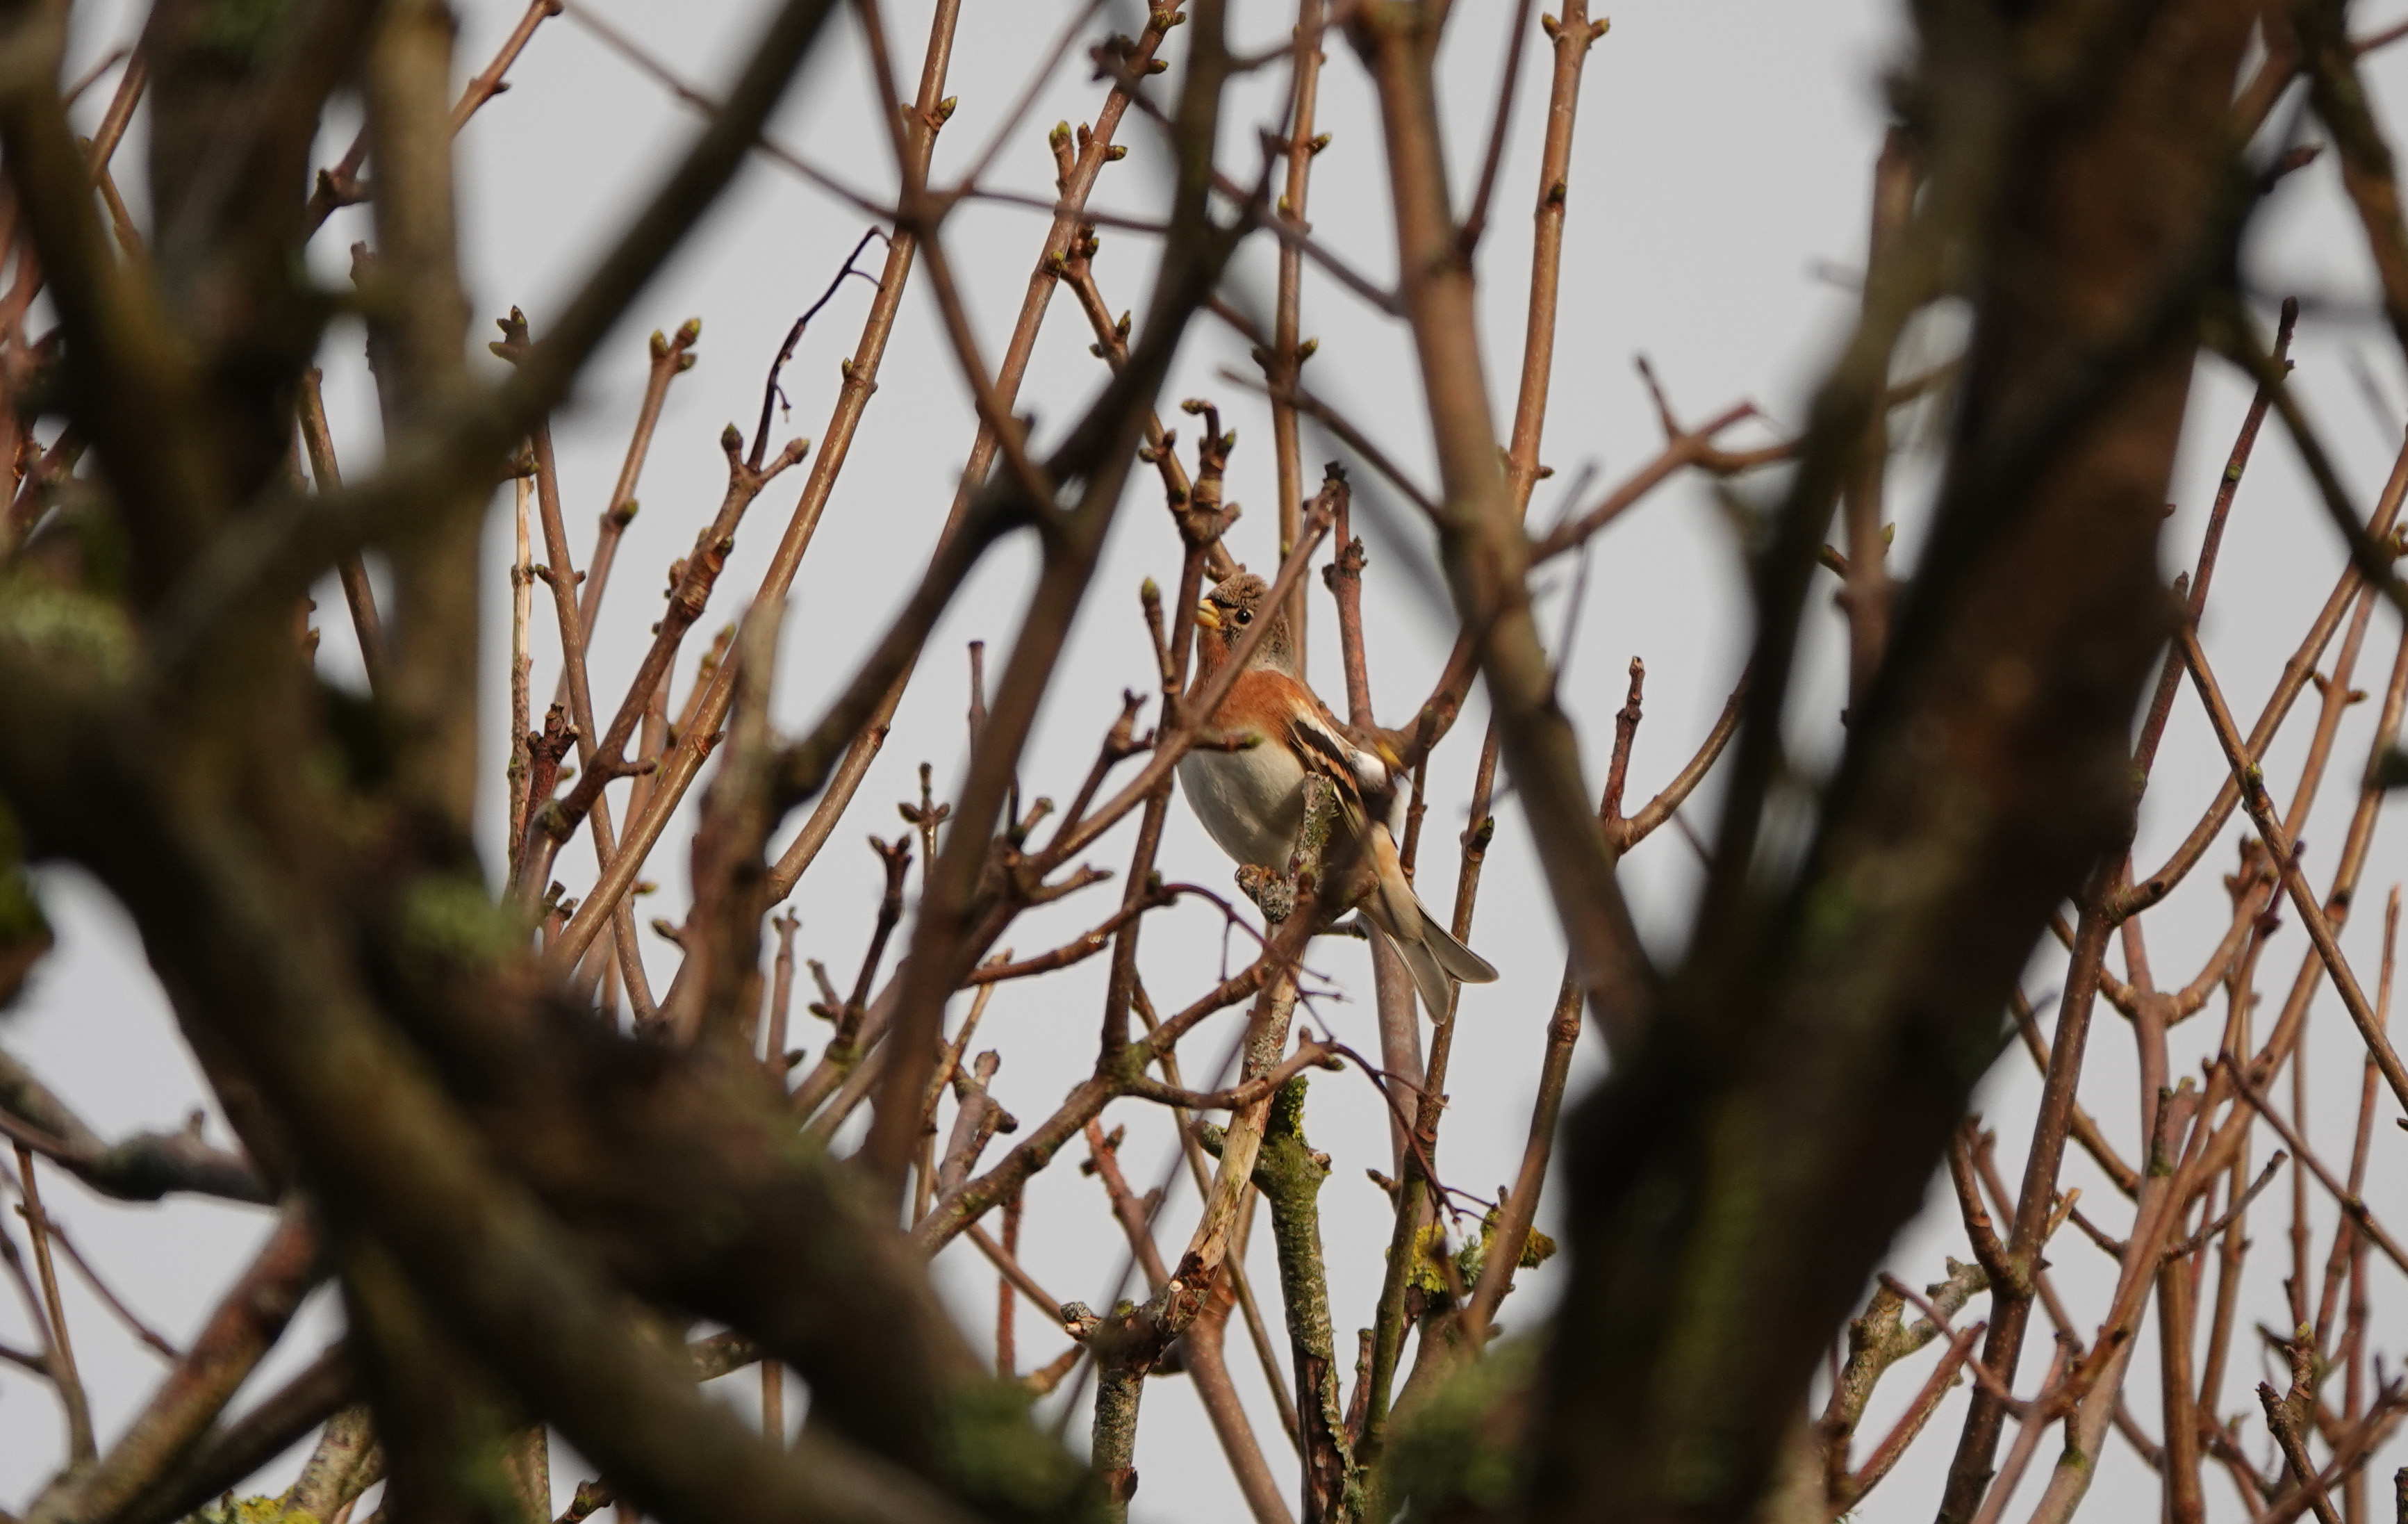 Male Brambling in Sycamores above Millcombe Pines © Angus Croudace